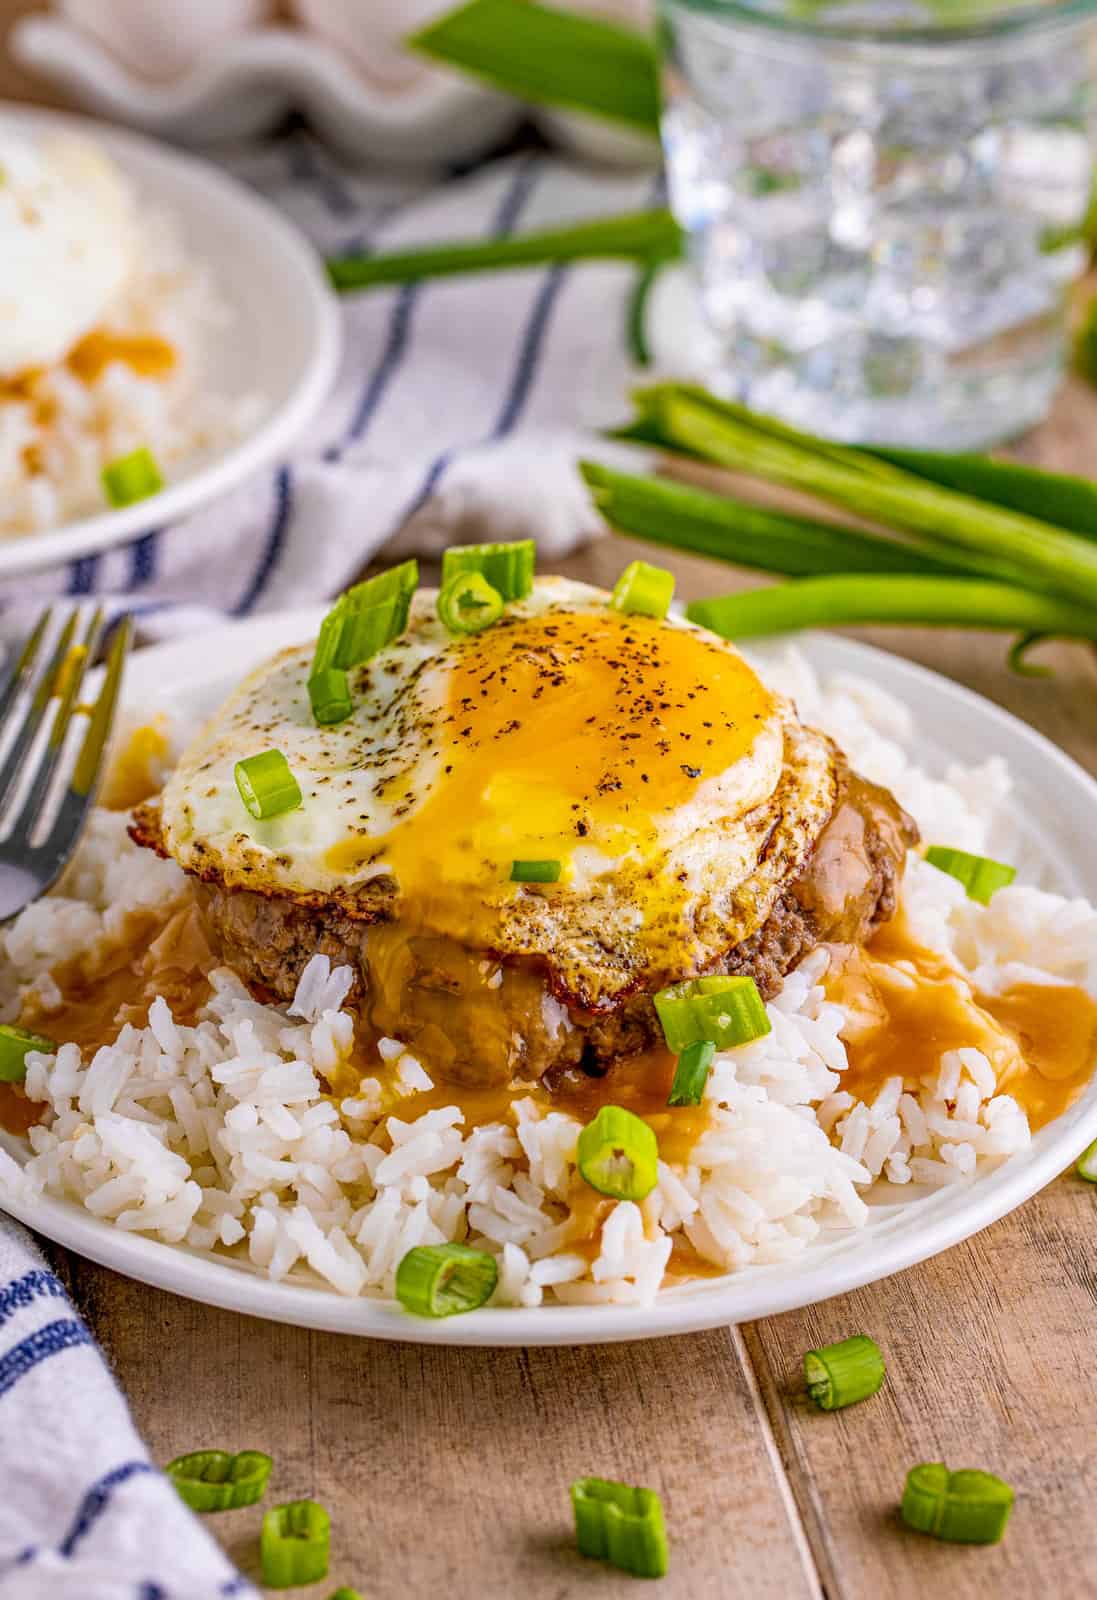 Loco Moco Recipe over rice with yolk running out of egg on top.